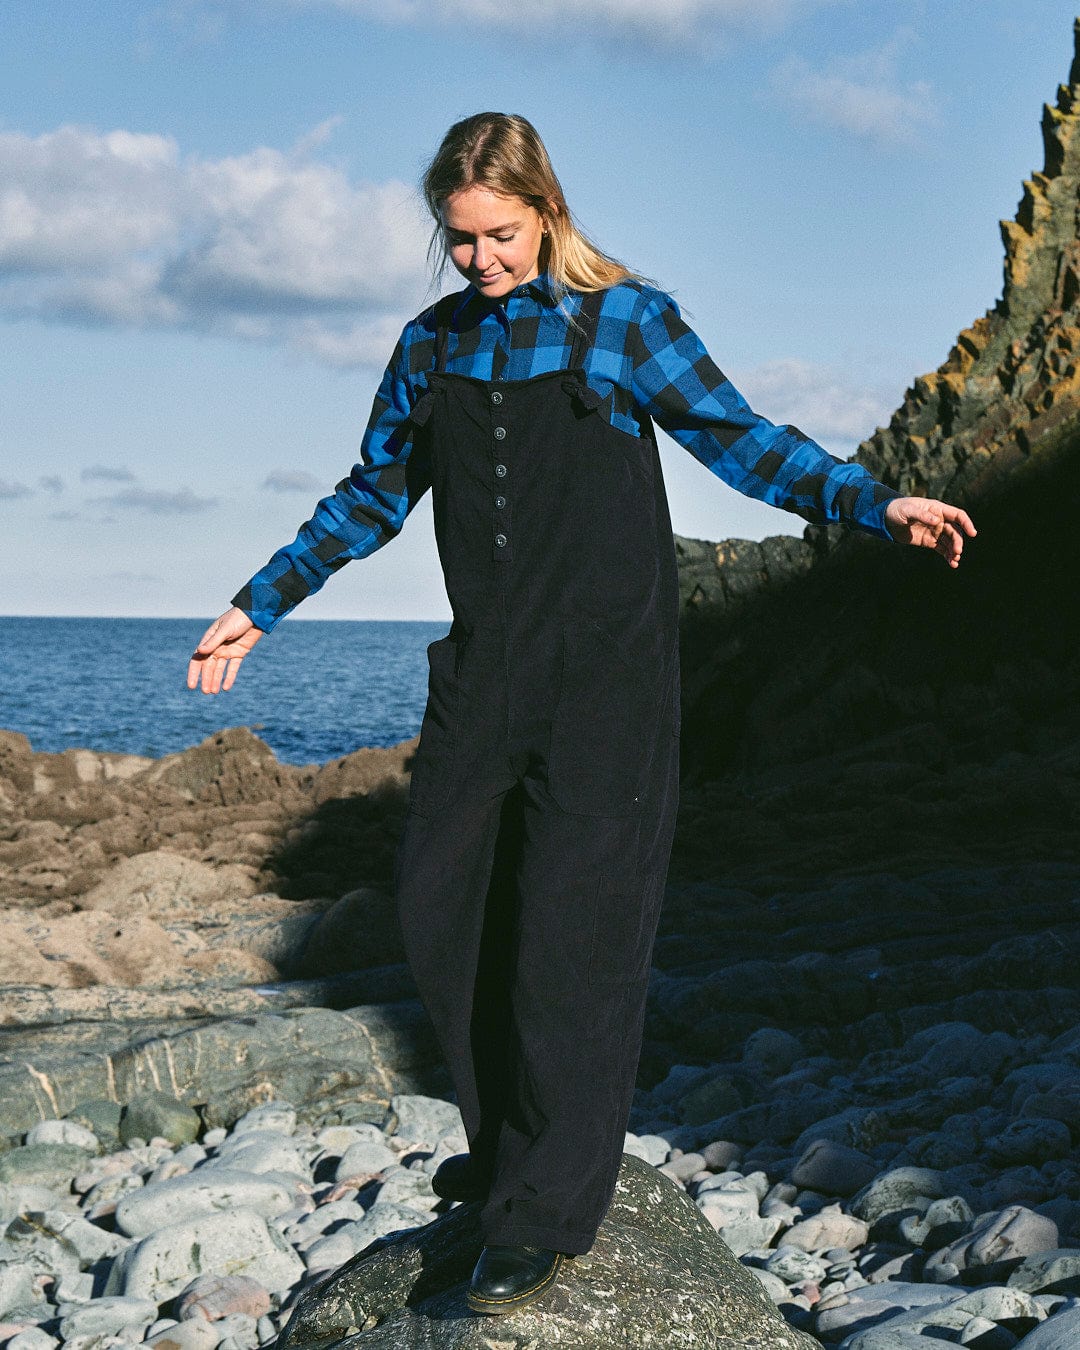 A fashion-conscious woman in a **Nancy - Womens Cord Jumpsuit - Dark Blue** by **Saltrock** stands on a rocky shoreline, balancing with arms extended, with the ocean and cliffs in the background.